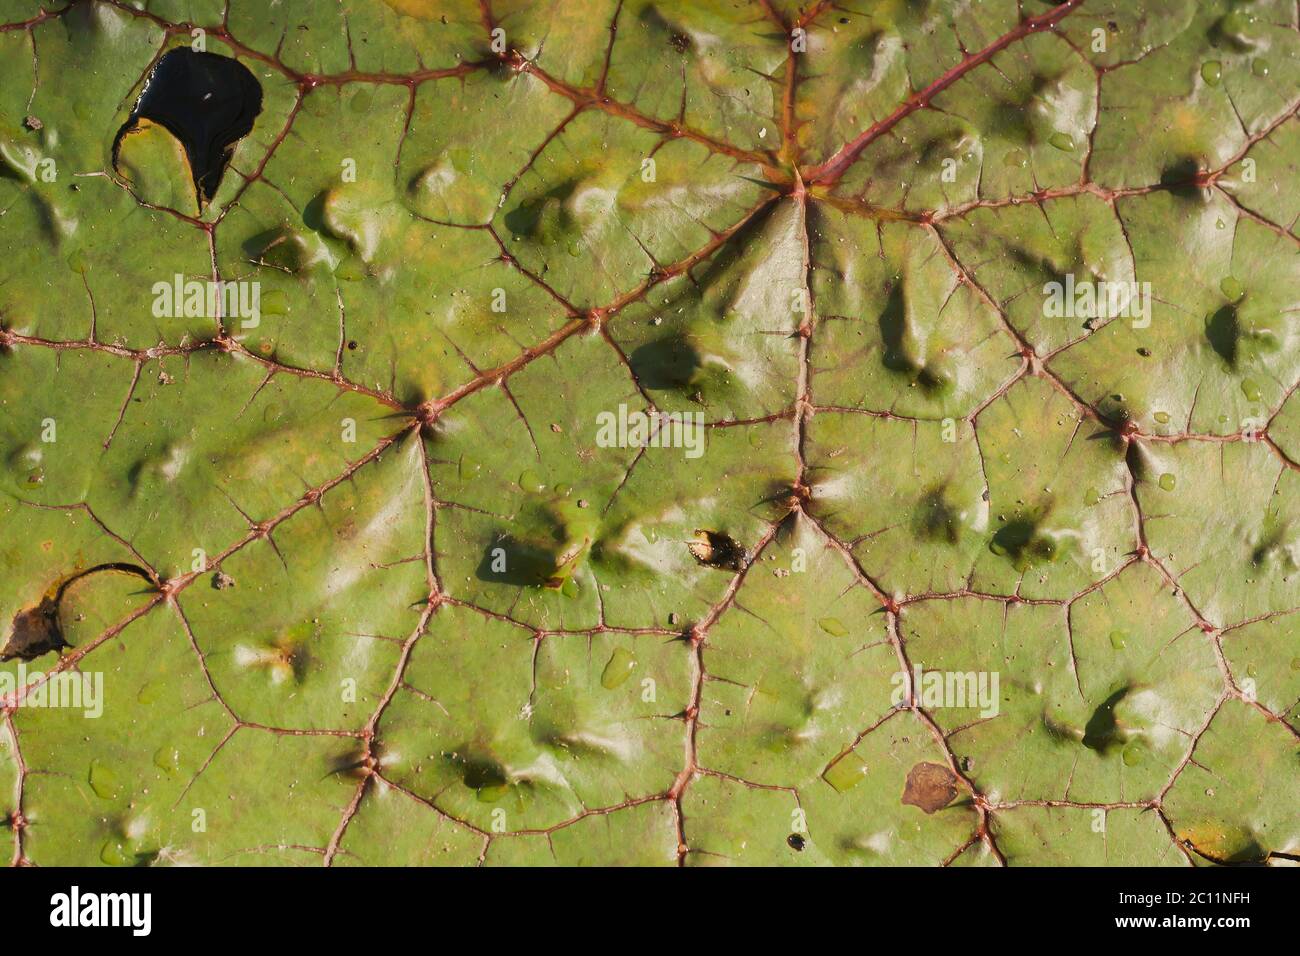 Prickly waterlily green floating leaves close up Stock Photo